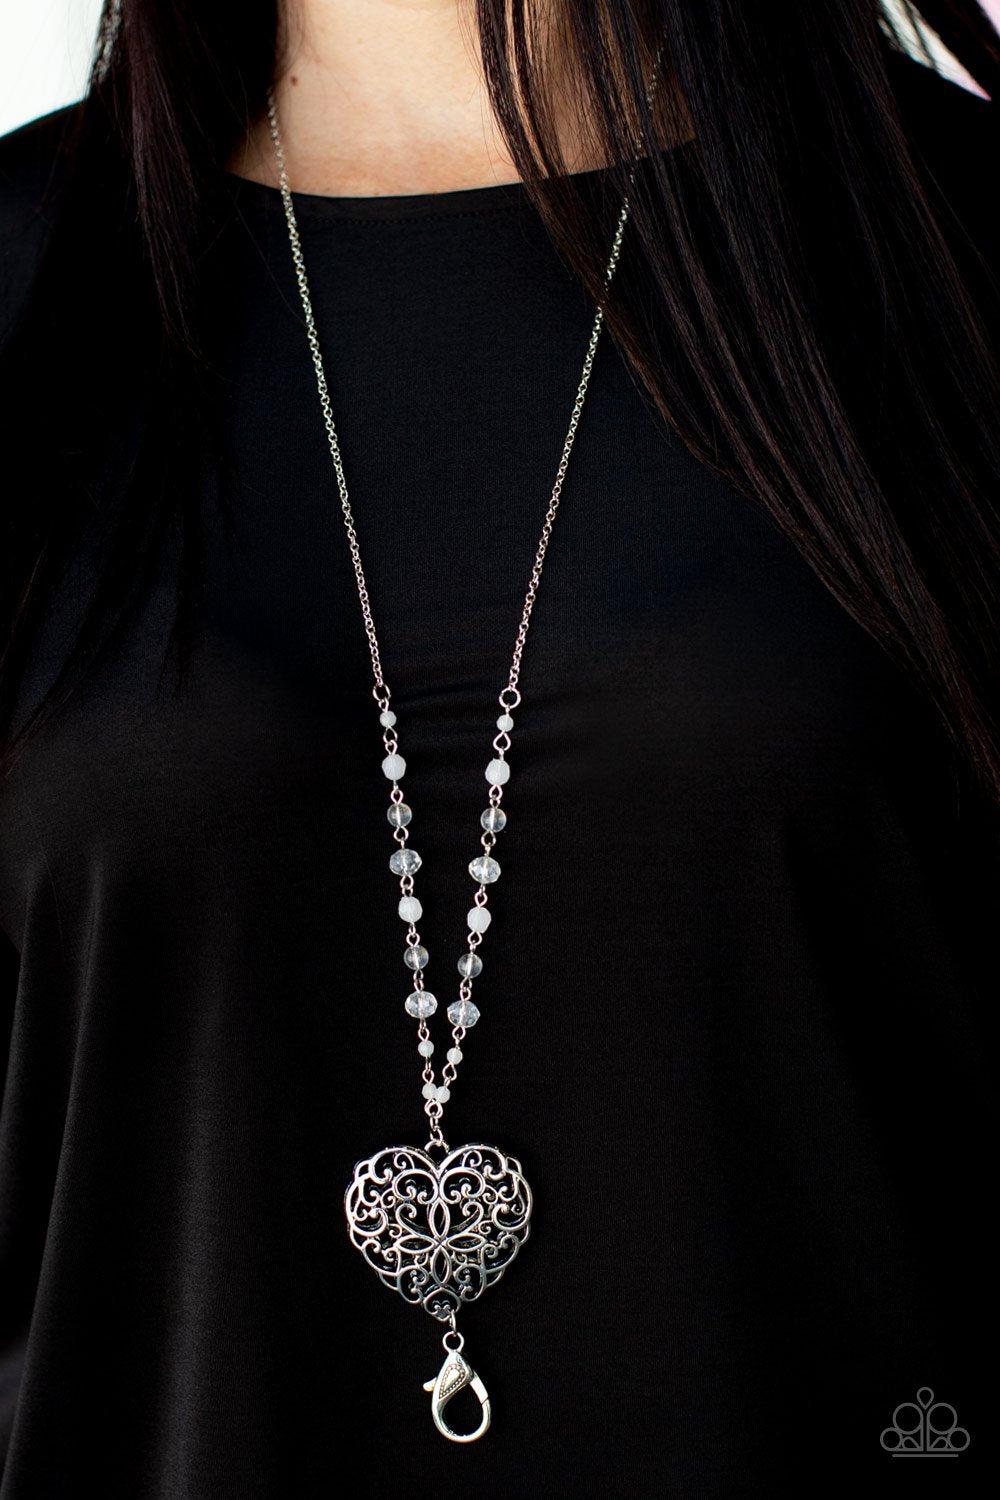 Doting Devotion White and Silver Filigree Heart Lanyard Necklace - Paparazzi Accessories 2021 Convention Exclusive- model - CarasShop.com - $5 Jewelry by Cara Jewels